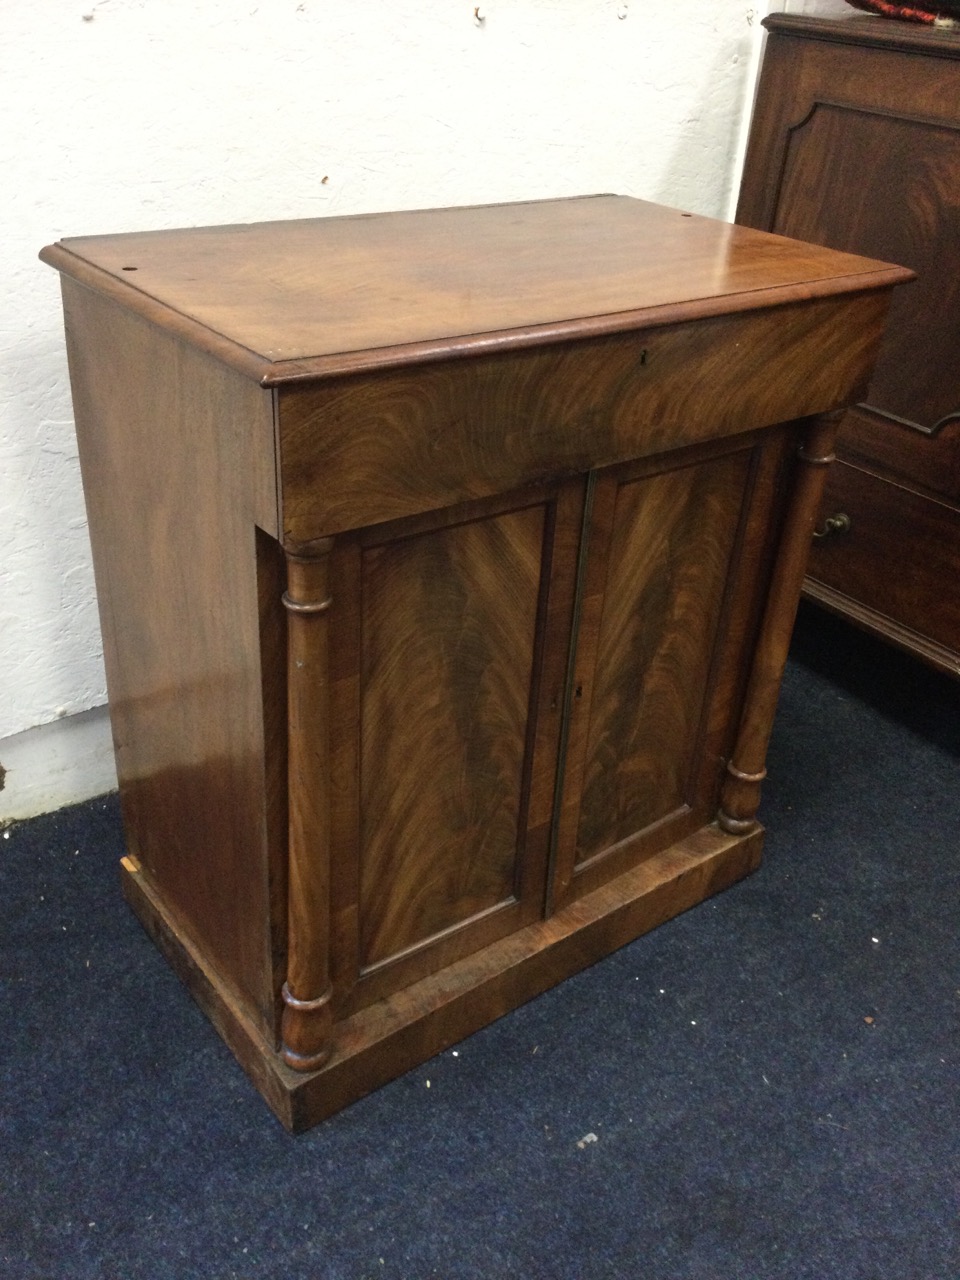 A C19th mahogany chiffonnier with rectangular moulded top above a frieze drawer and a pair of - Image 2 of 3